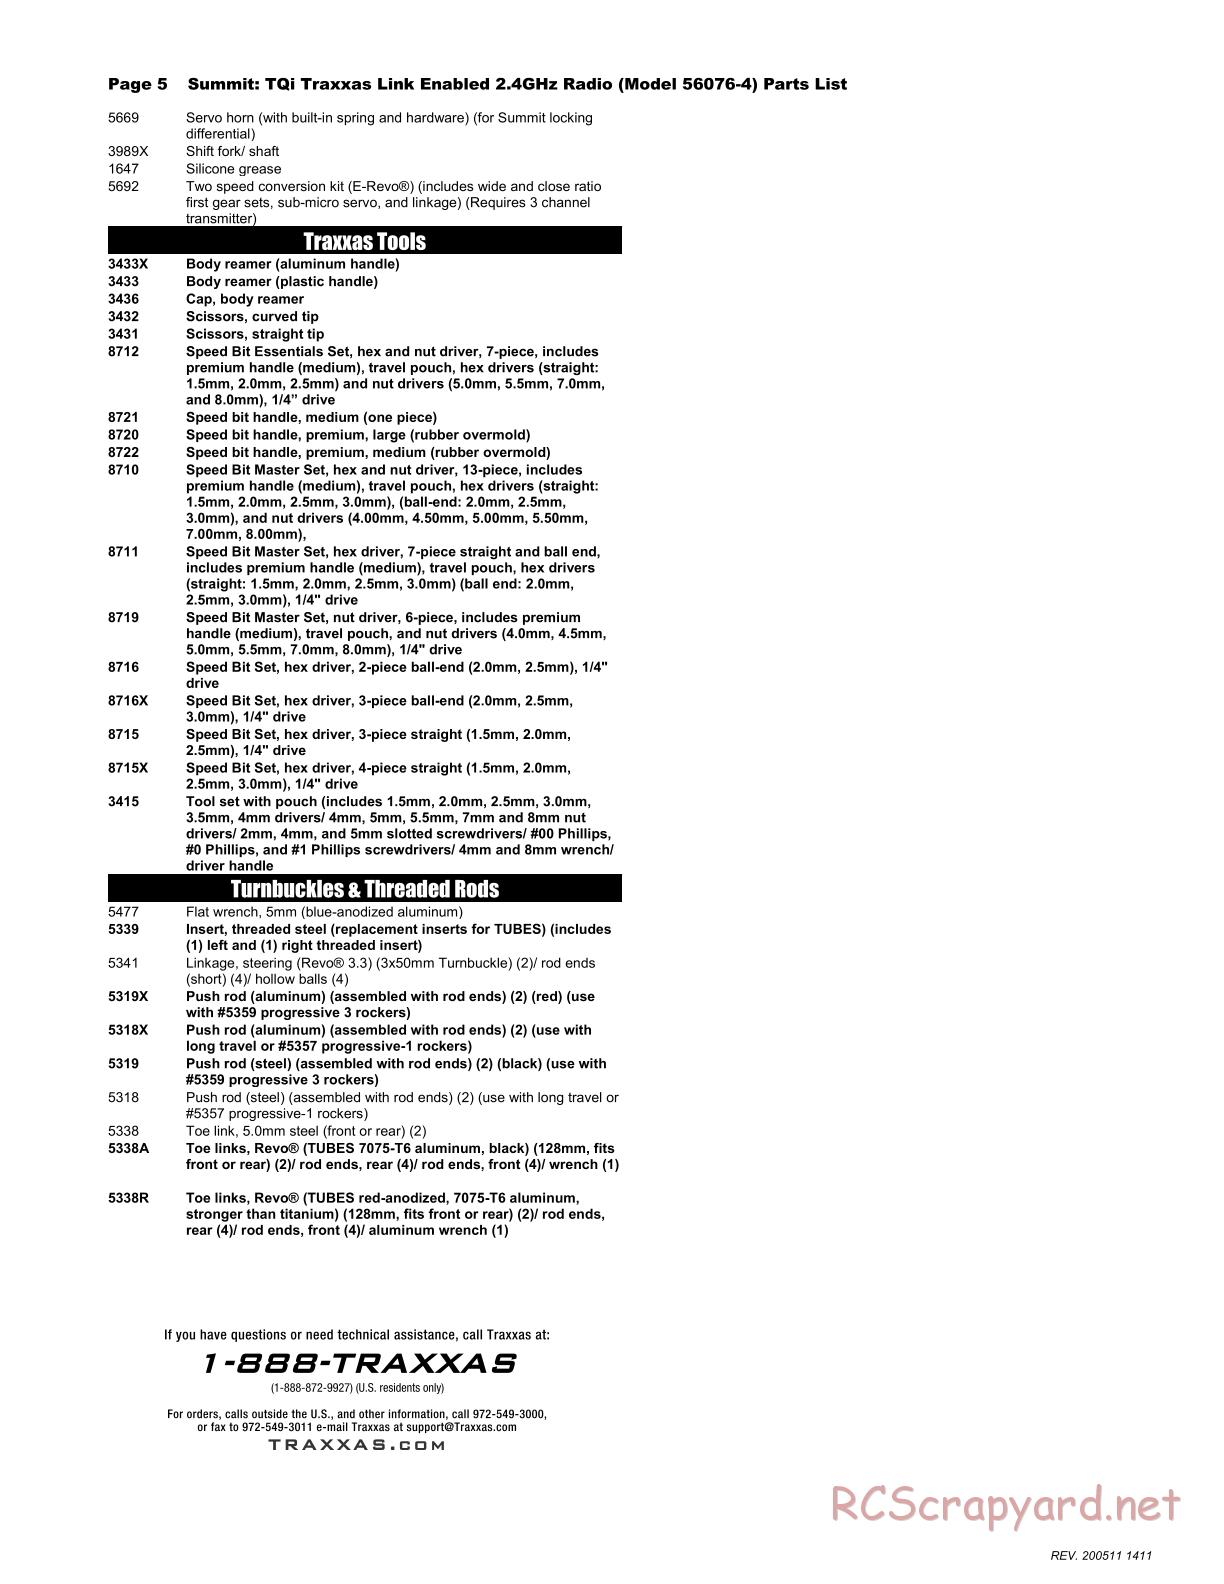 Traxxas - Summit - Parts List - Page 5